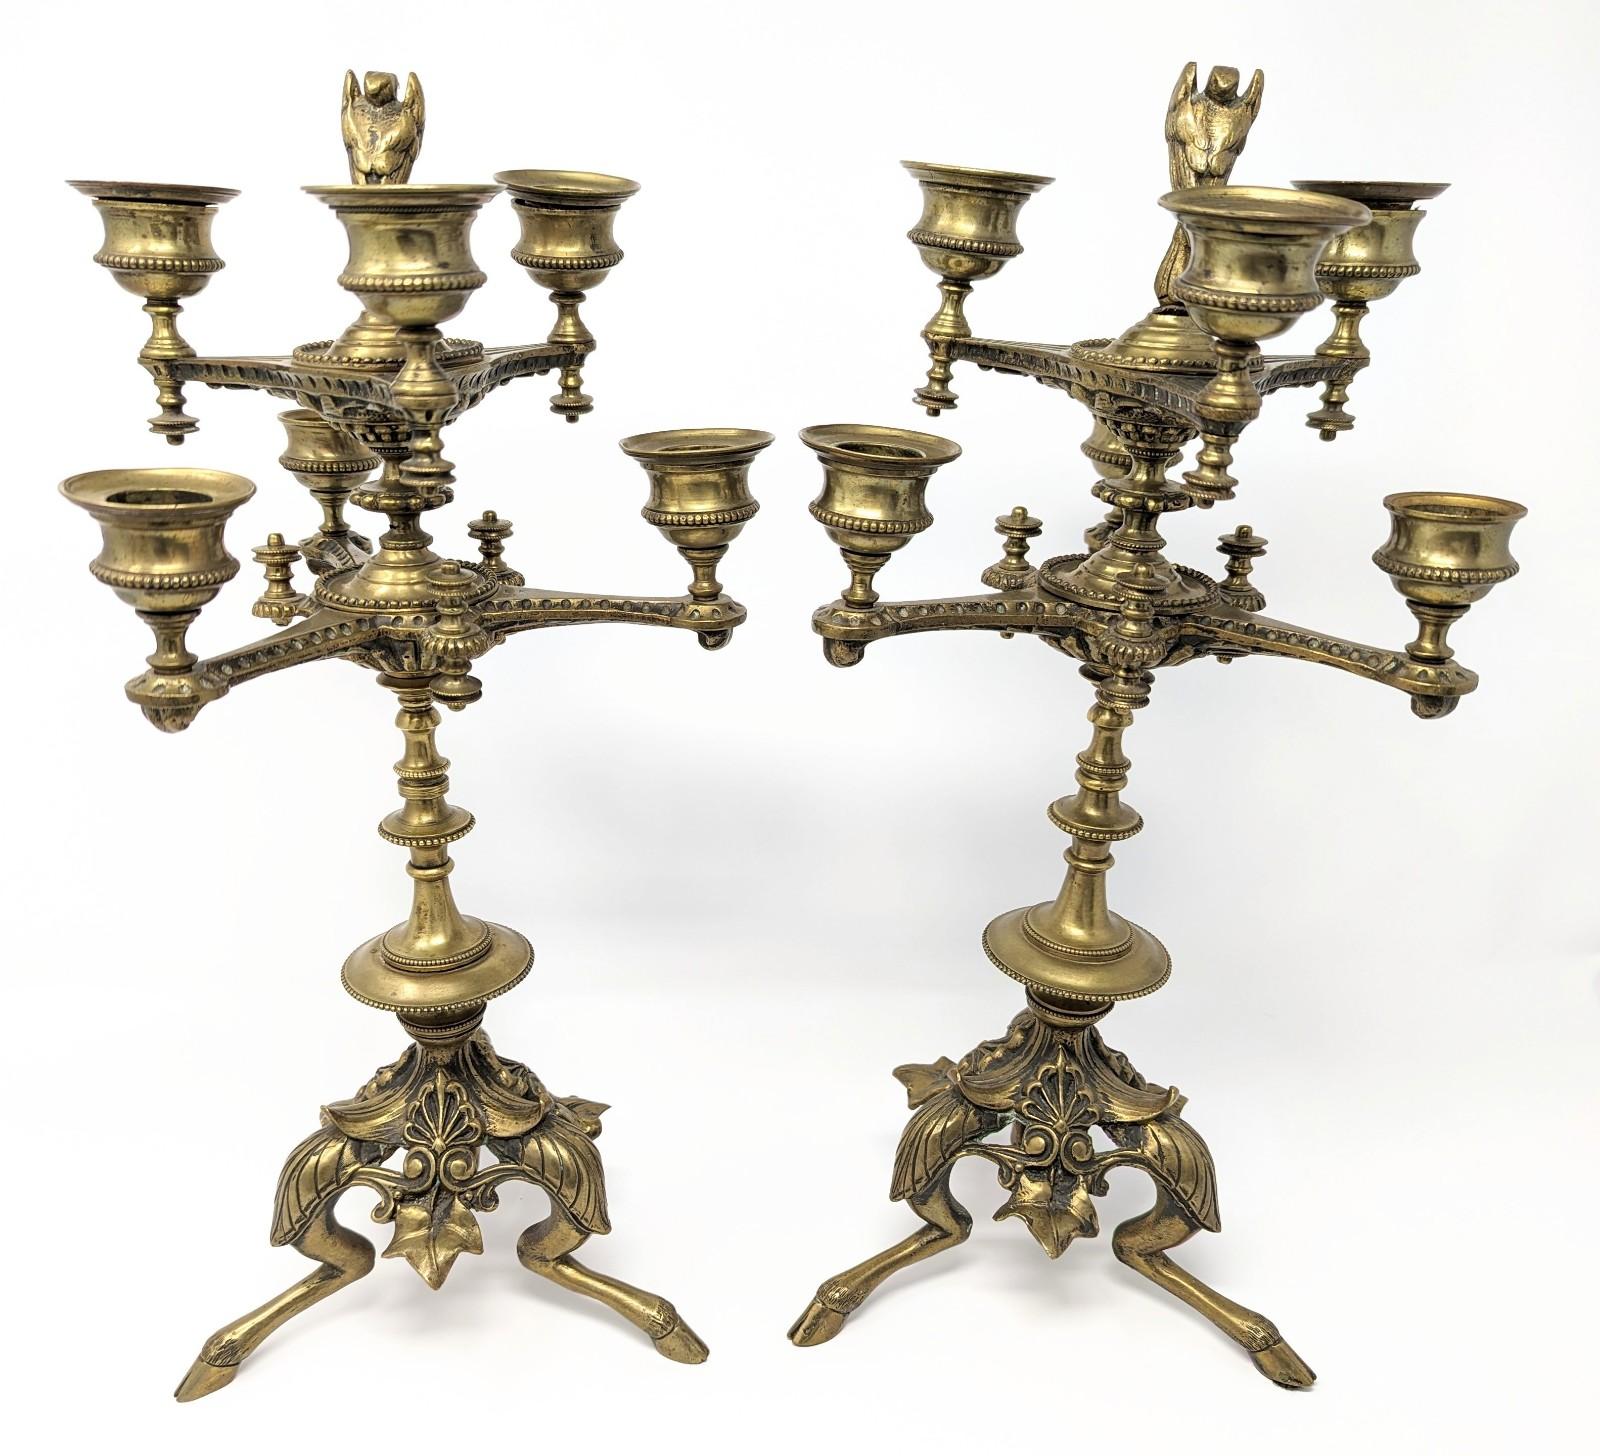 Neoclassical Revival Pair of Antique Candelabras, 19th Century European Brass Candlesticks Footed For Sale